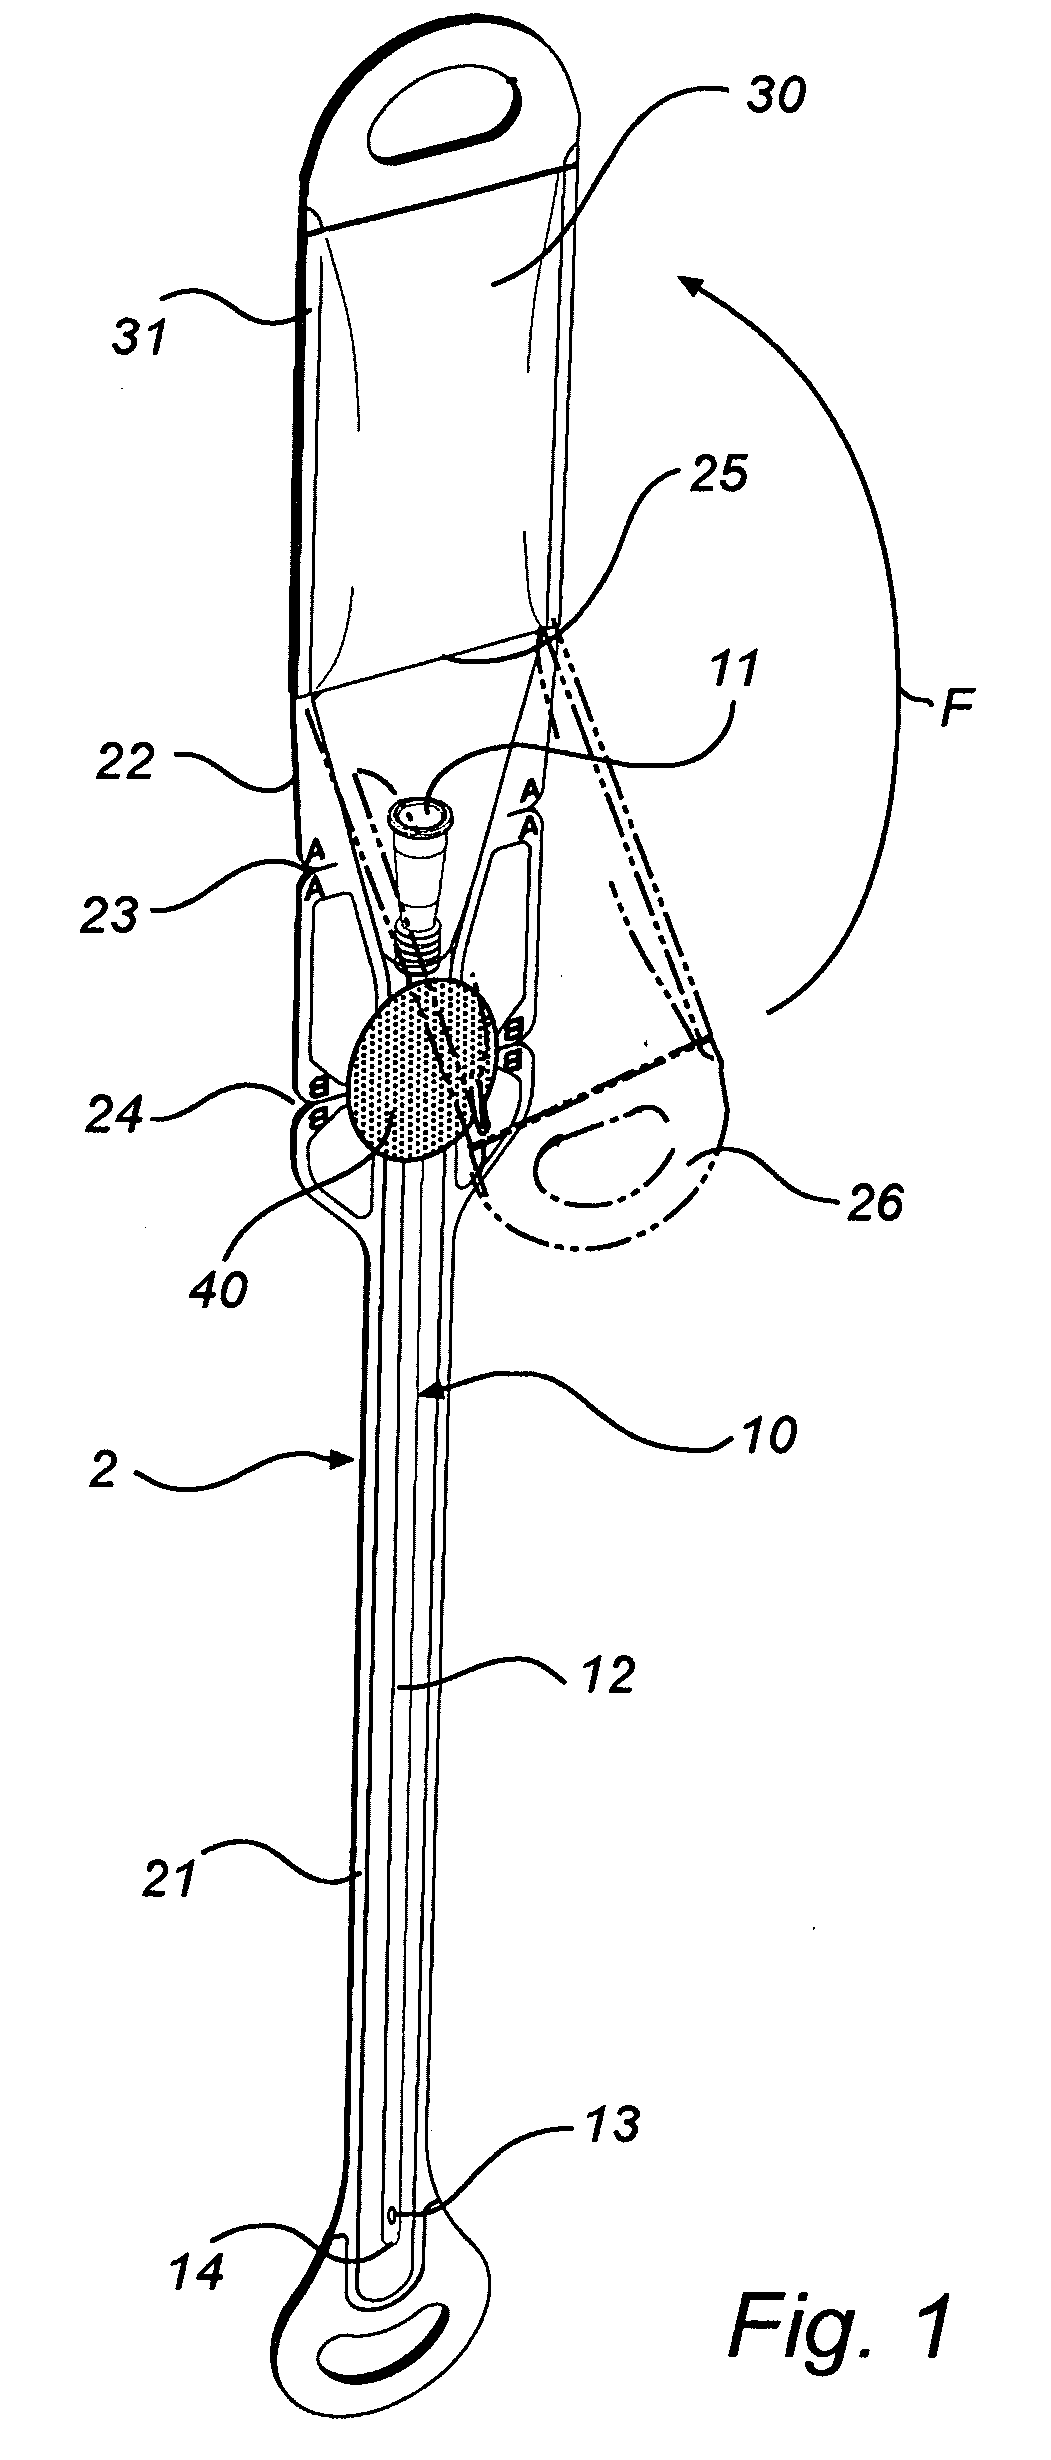 Folded Catheter Assembly With Adhesive Grip